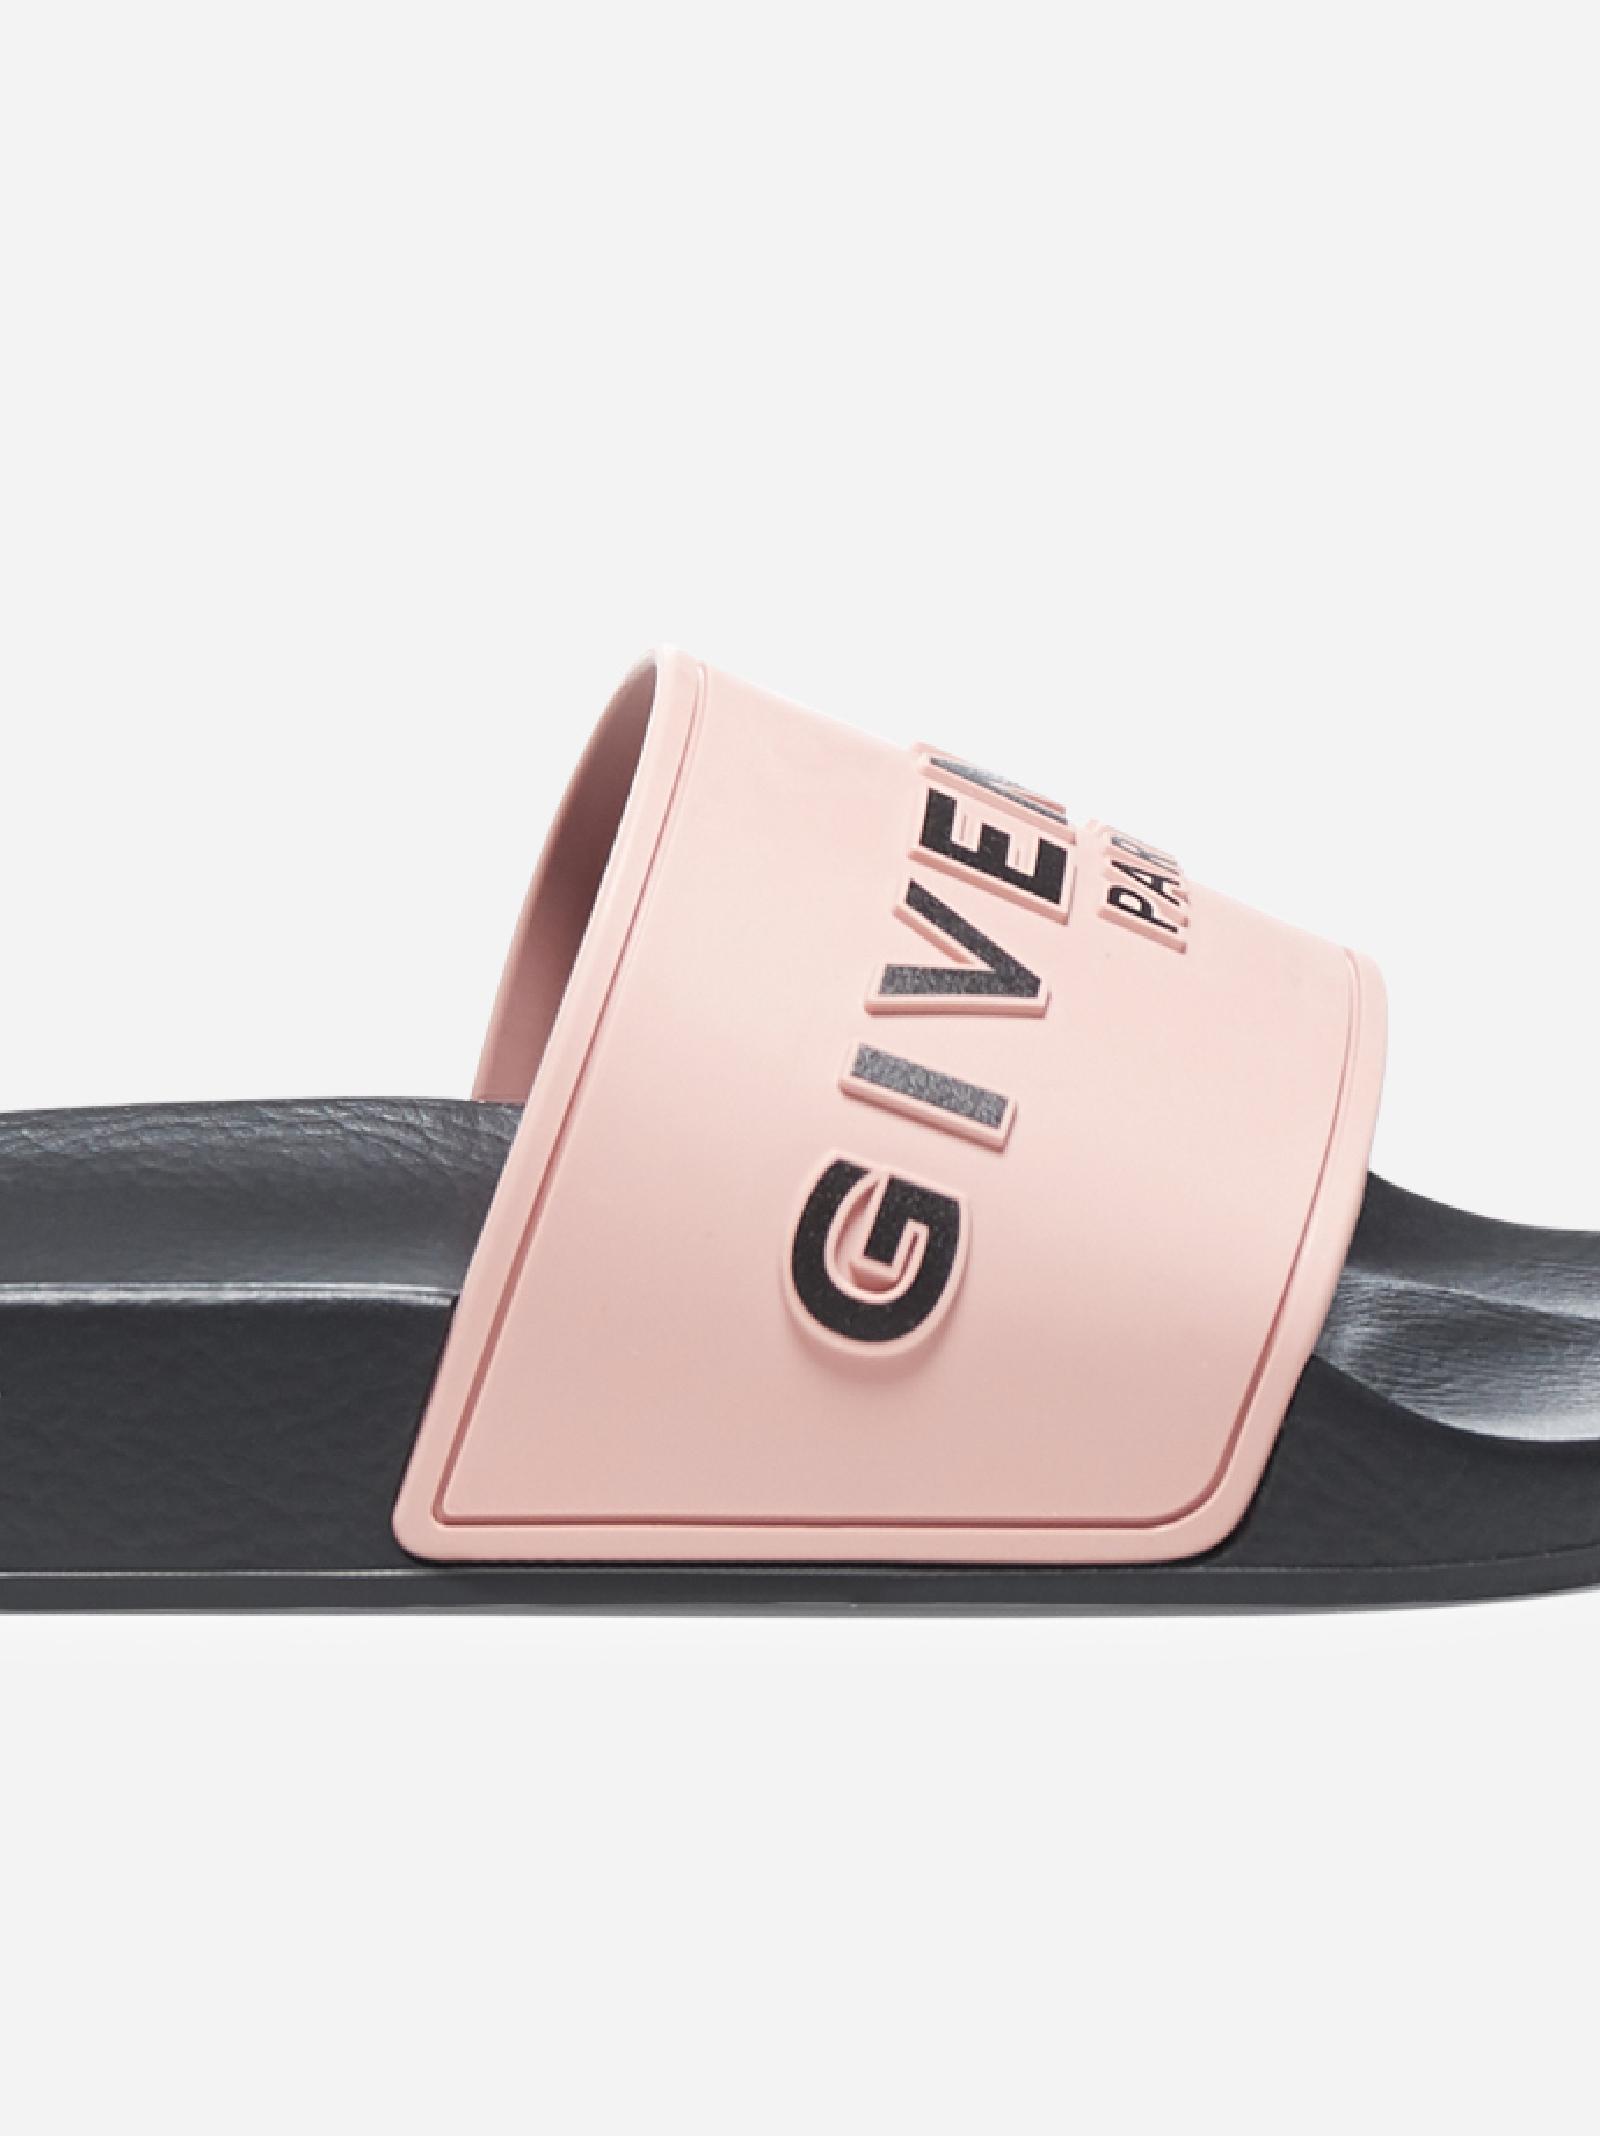 givenchy slides womens sale